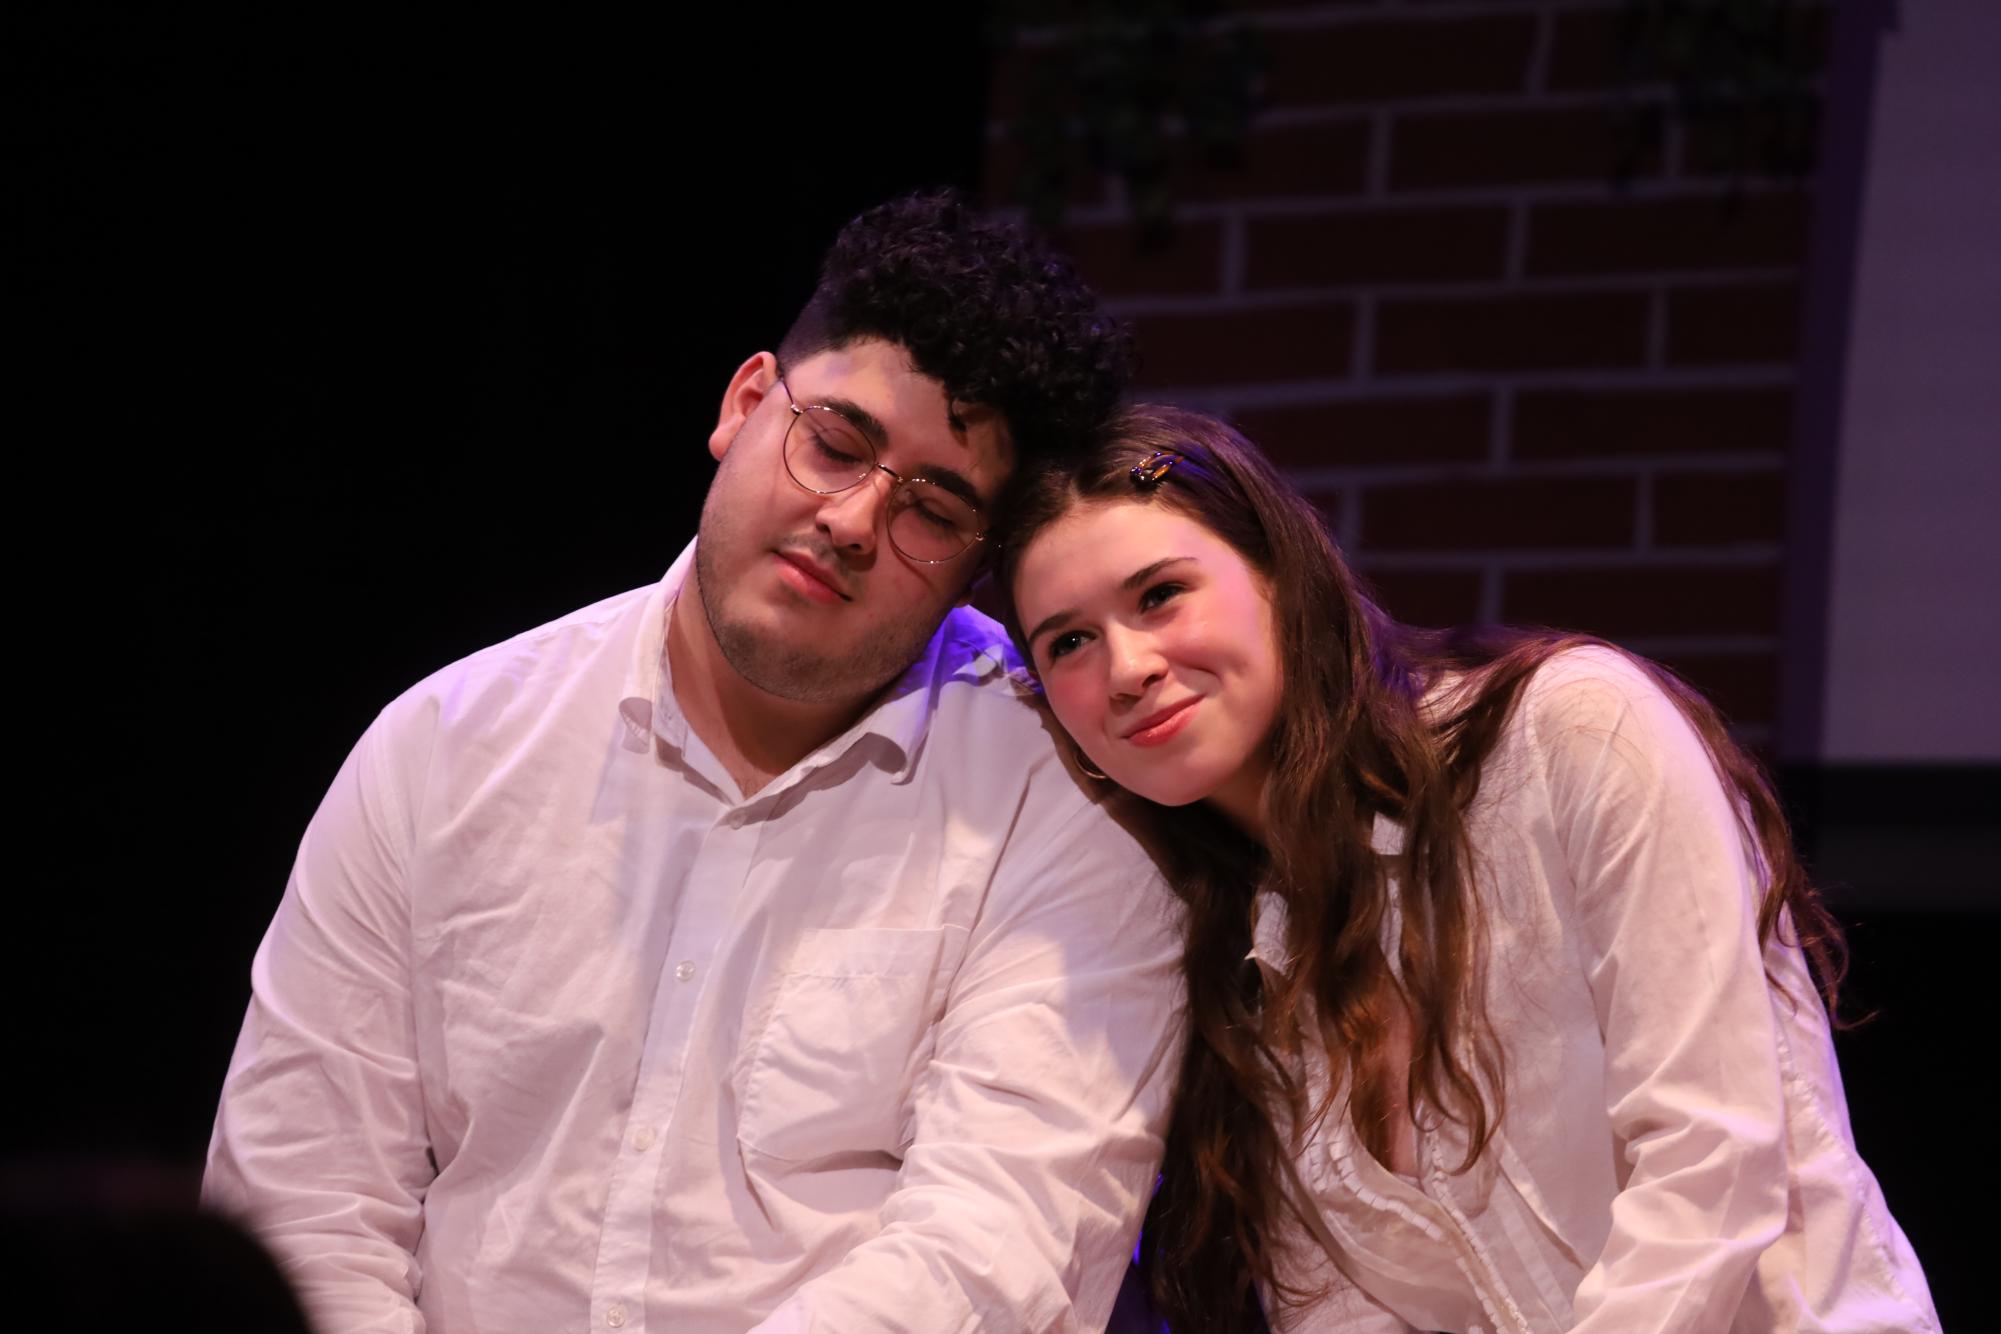 Matthias Jaylen 24 (left) and Natalie Beit 25 (right) play siblings Ryan Summers and Sydney Summers, respectively. The two are both above the average students, awarding them high social status in the plot of Ranked.